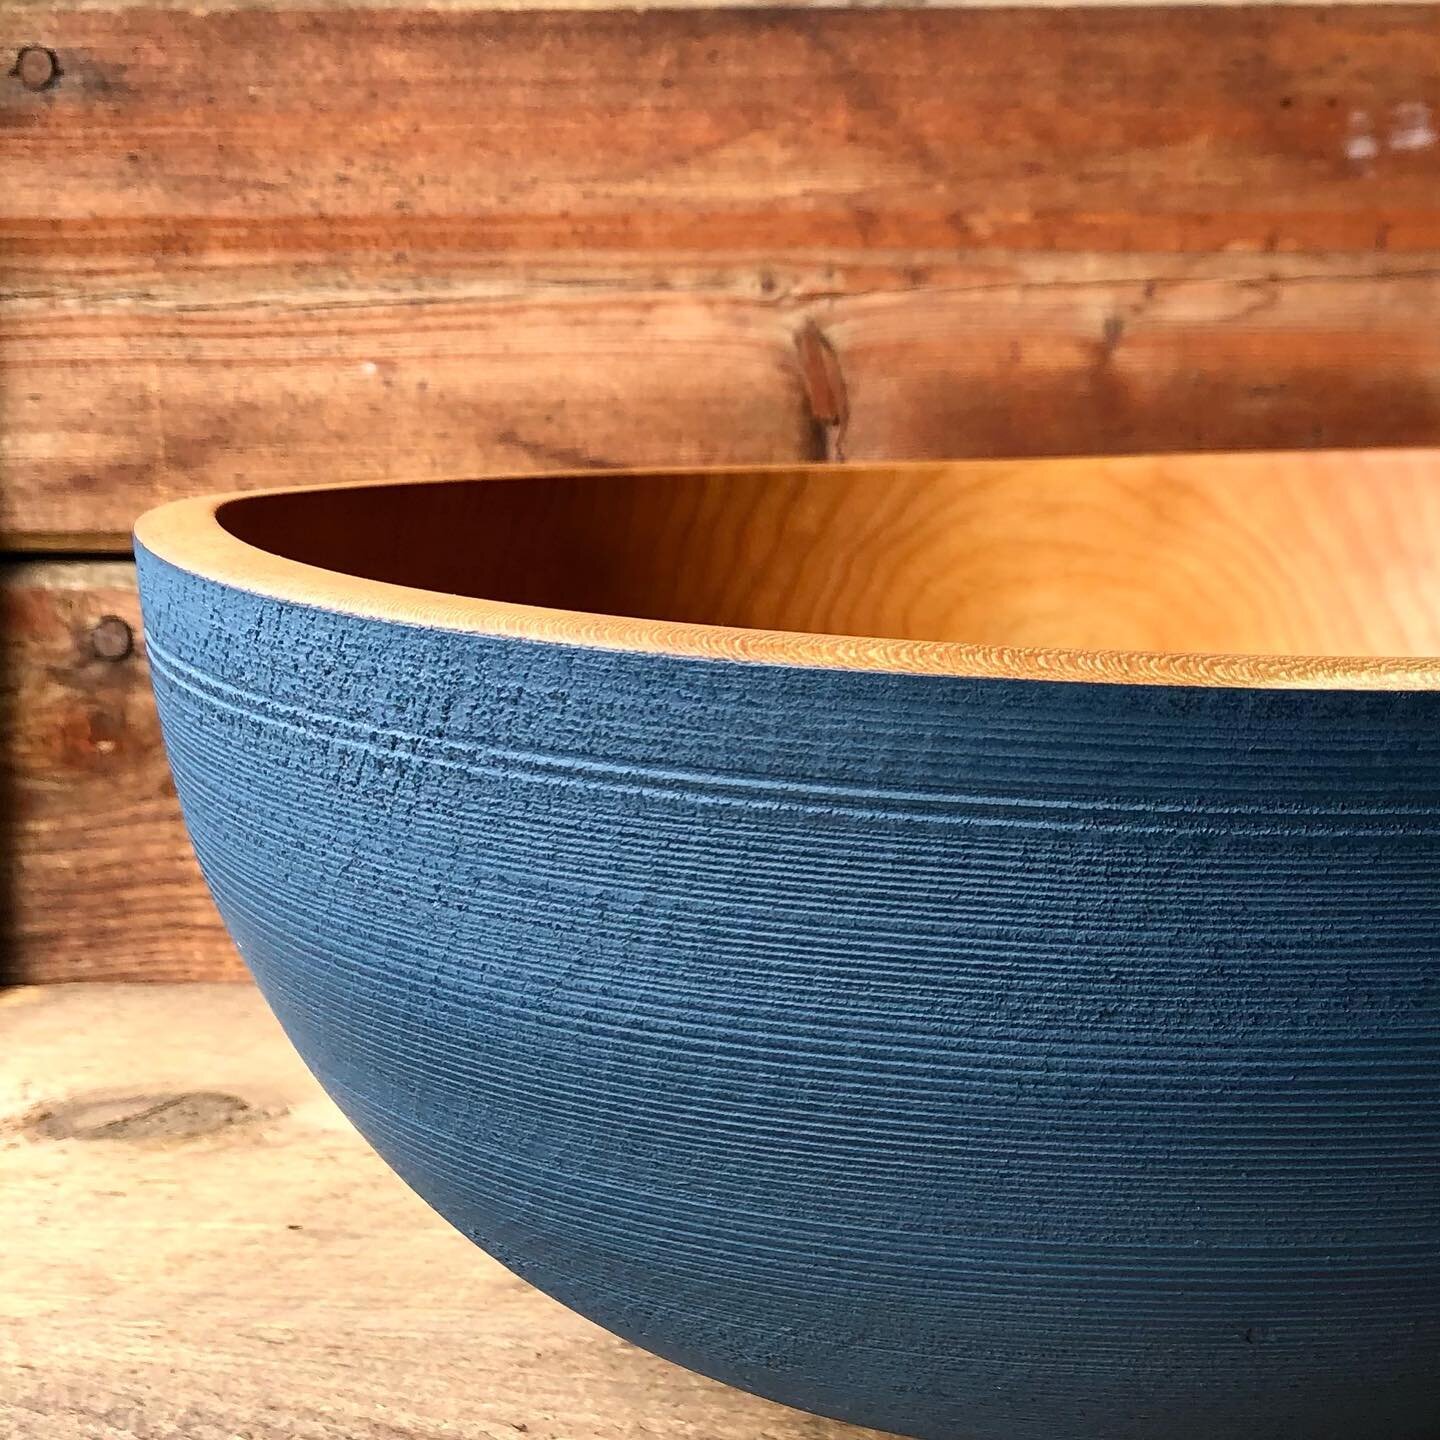 This and several other lovely bowls still looking for homes up on our site 😊. #handmade #holidays #giftideas #maker #theberkshires #homedecor #home #kitchen #diningroom #cook #woodenbowl